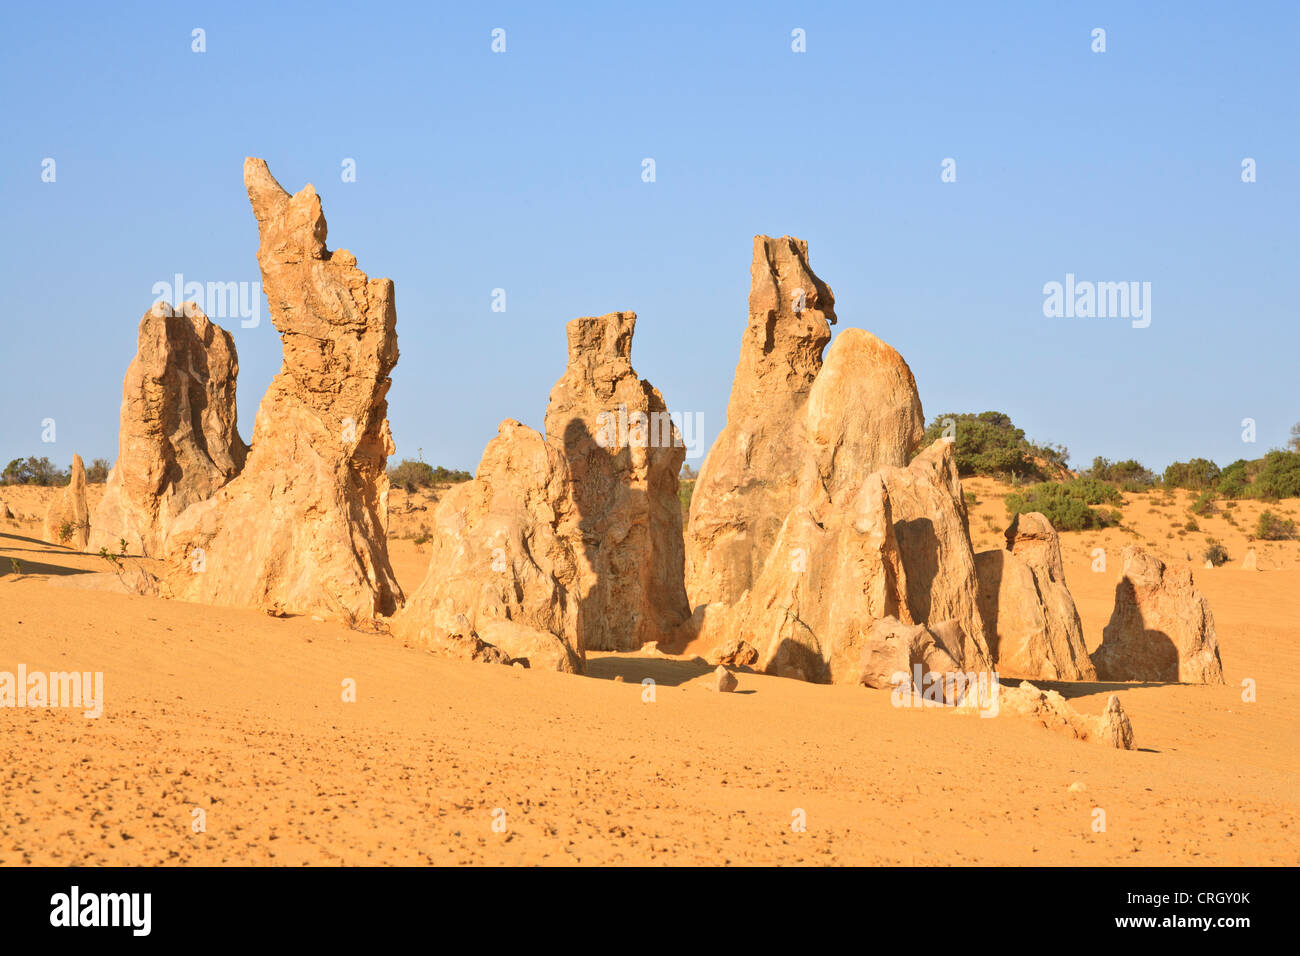 The Pinnacles, an area of eroded limestone formations in Nambung National Park, north of Perth in Western Australia. Stock Photo